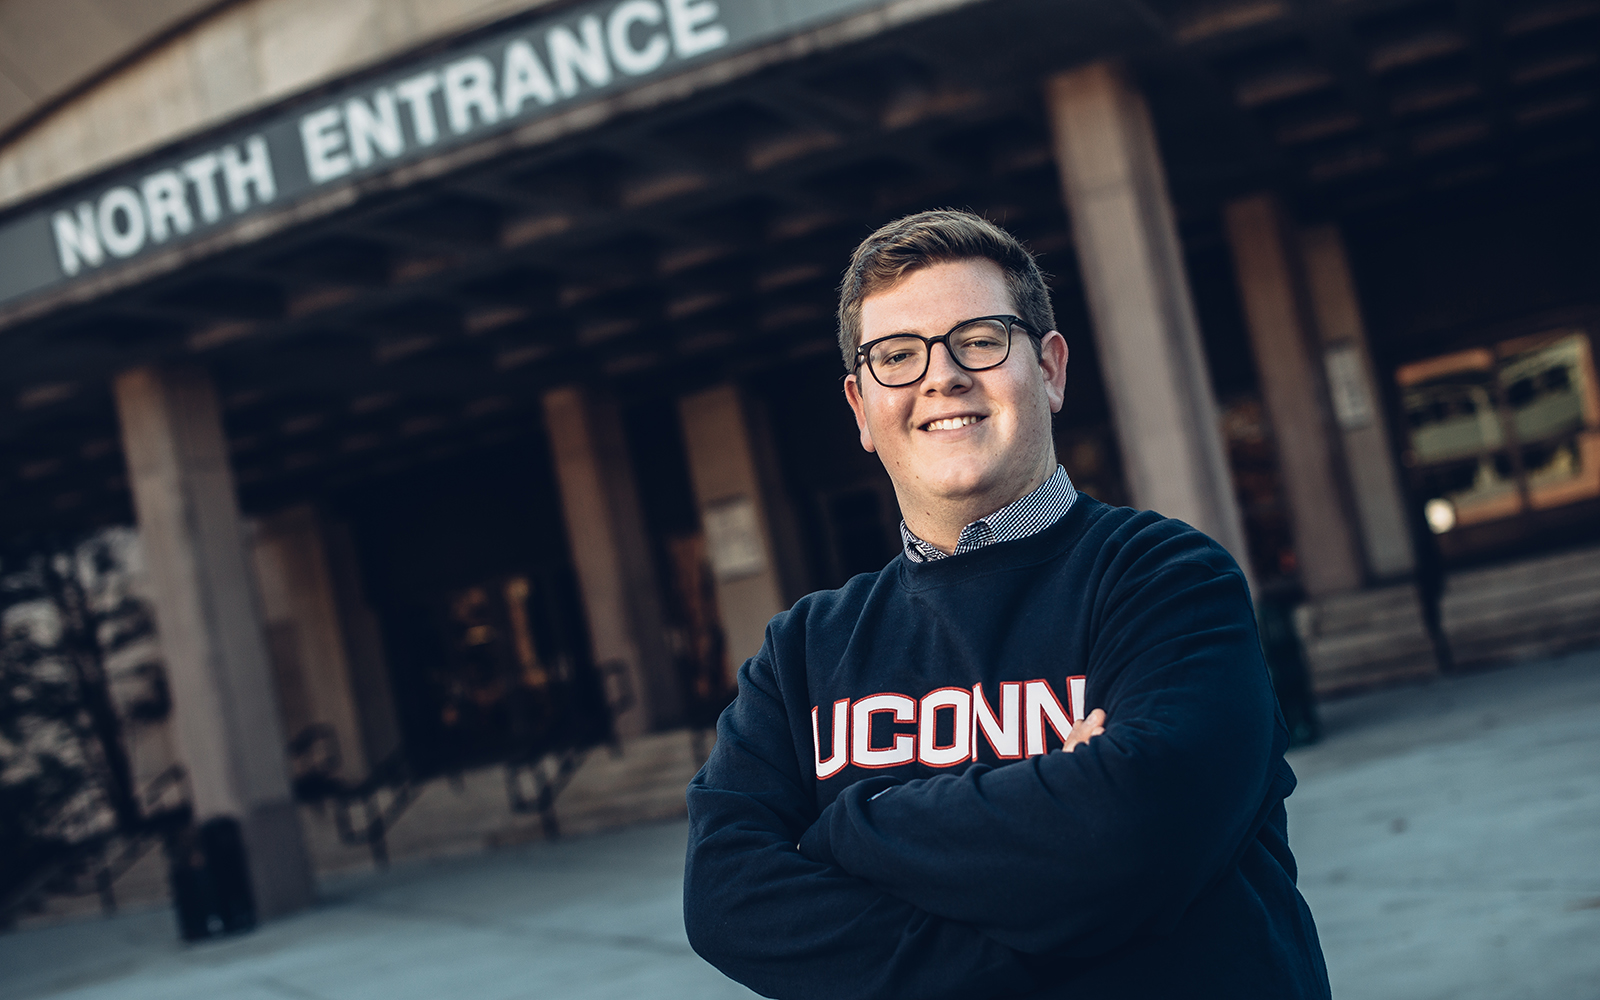 When senior Andrew Carroll graduates in May, he will have completed a triple major, and his resume will include a semester of education abroad and additional world travel that gave him a new, bolder perspective. (Nathan Oldham/UConn School of Business)